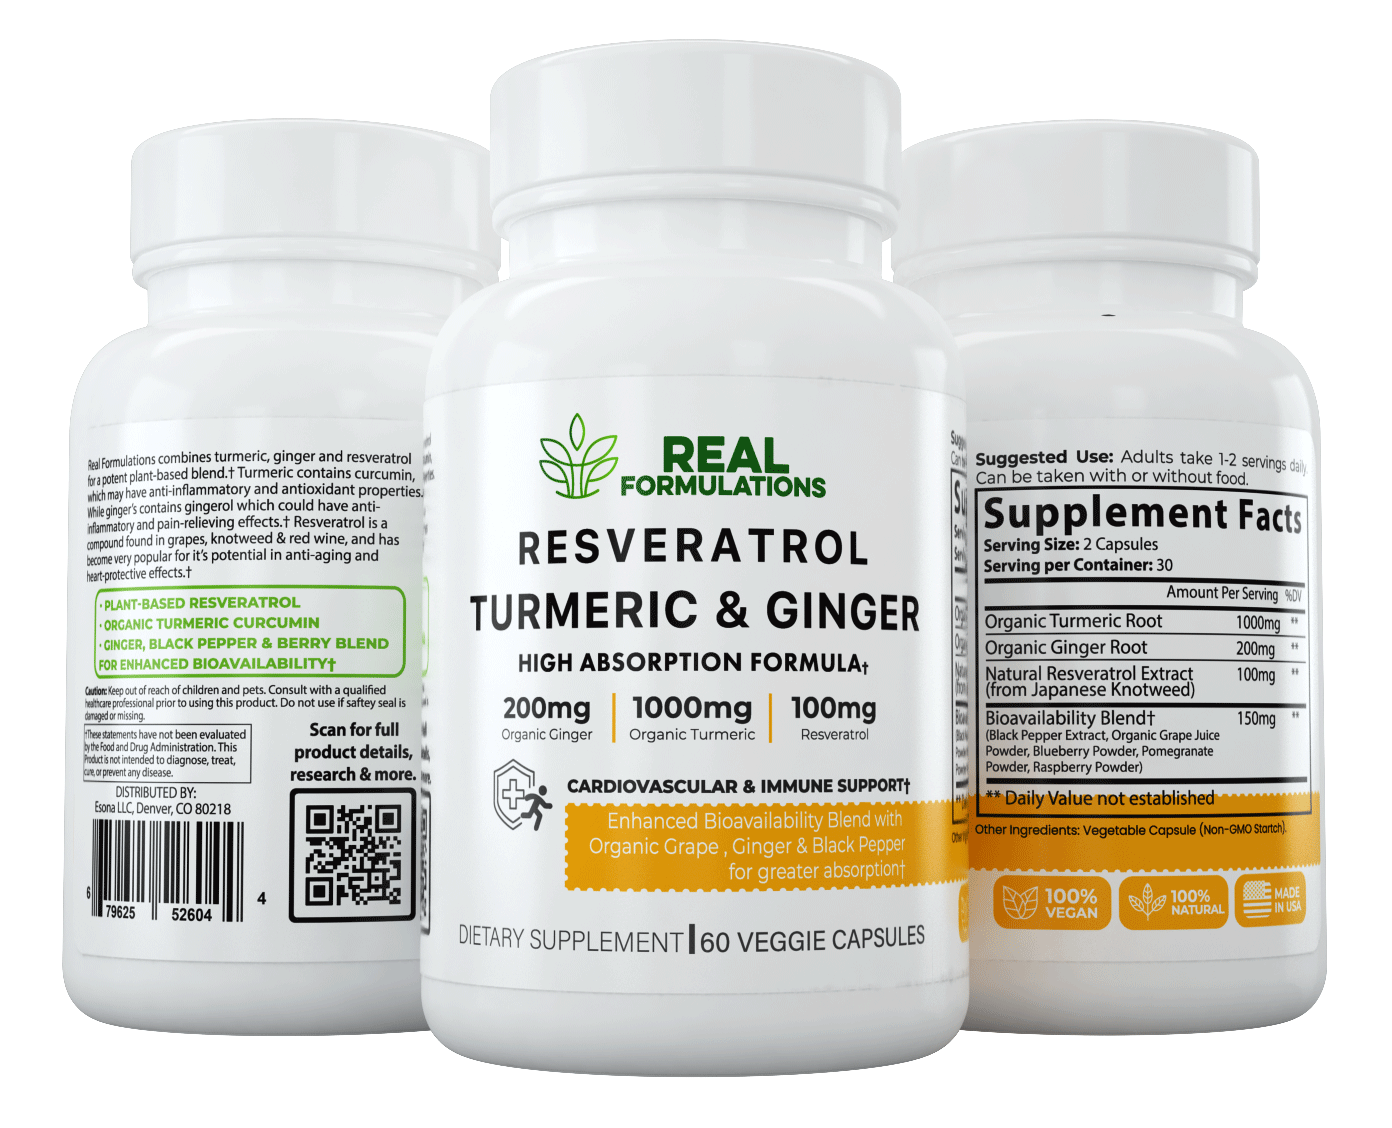 Real Formulations Turmeric with Resveratrol and Ginger Capsules. A blend of Turmeric Root, Ginger Root, Natural Resveratrol (from Japanese Knotweed), Black Pepper Extract, Grape Juice Powder, Blueberry, Pomegranate & Raspberry.